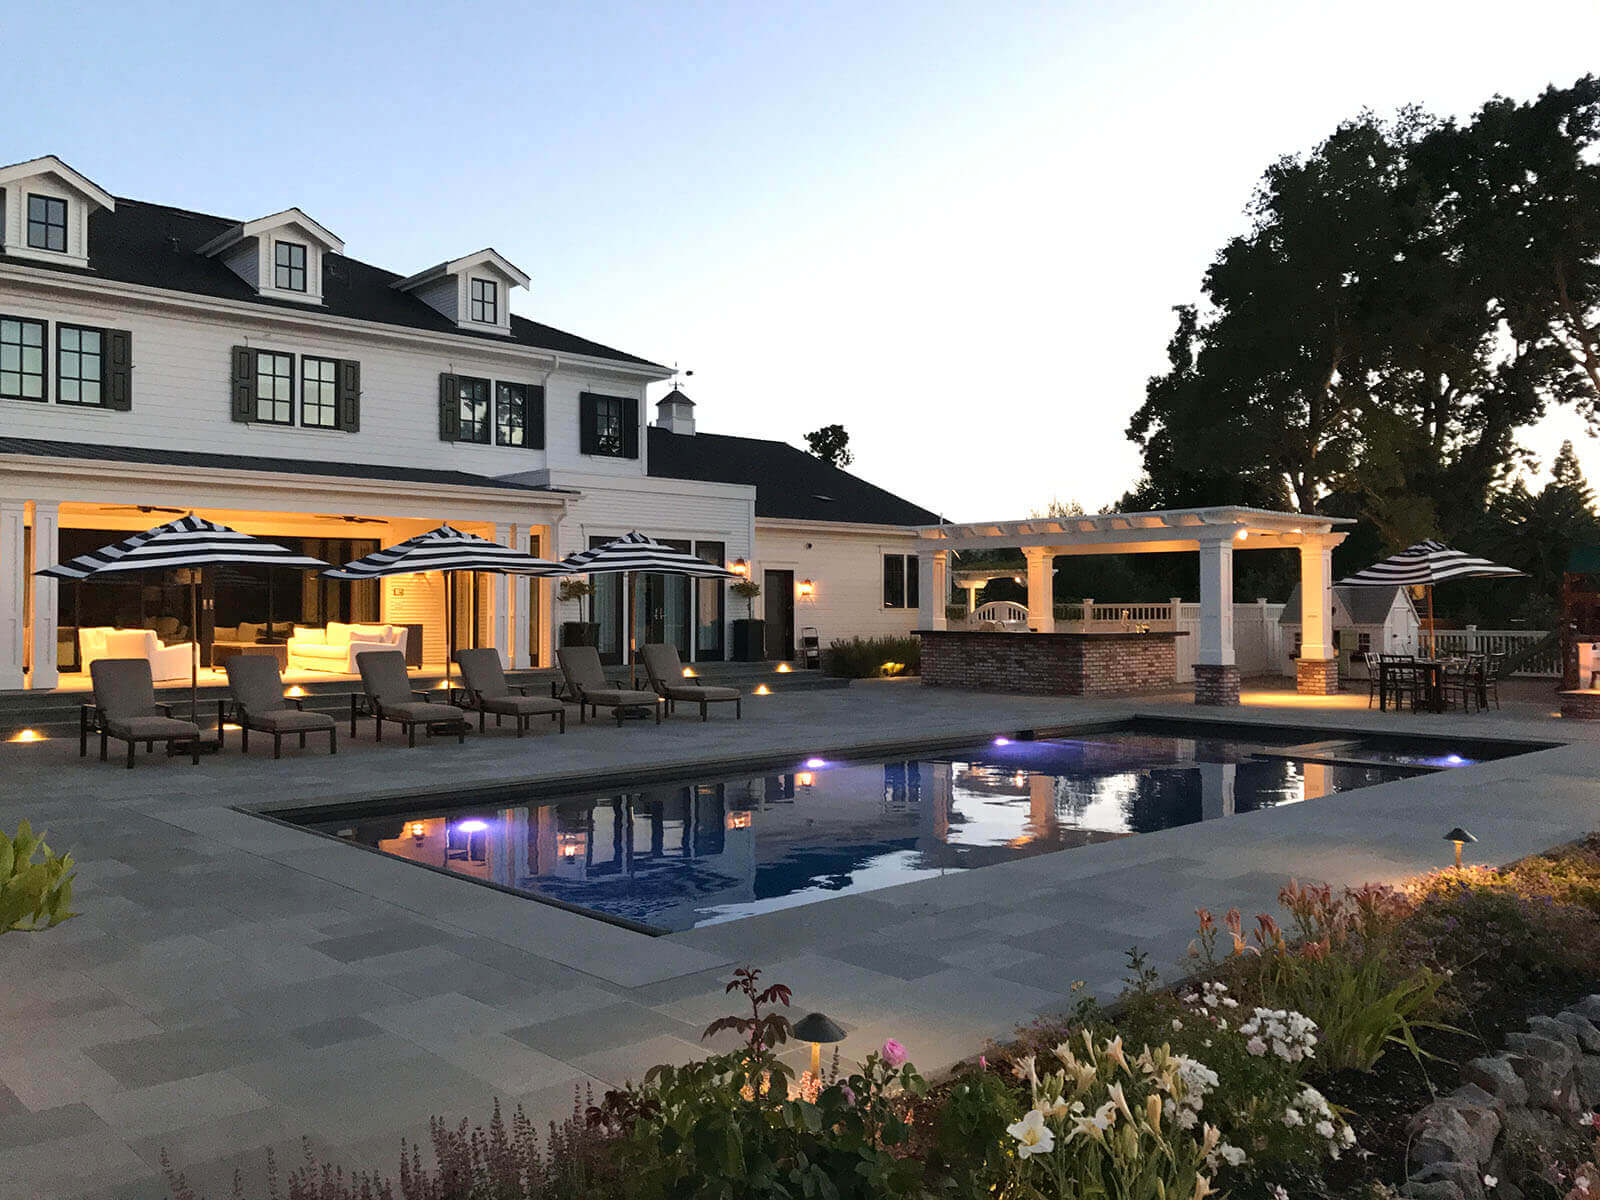 (pool view) Outdoor lighting at sunset, light fixtures around the edge of the structures, and accent lighting on staged gardening areas